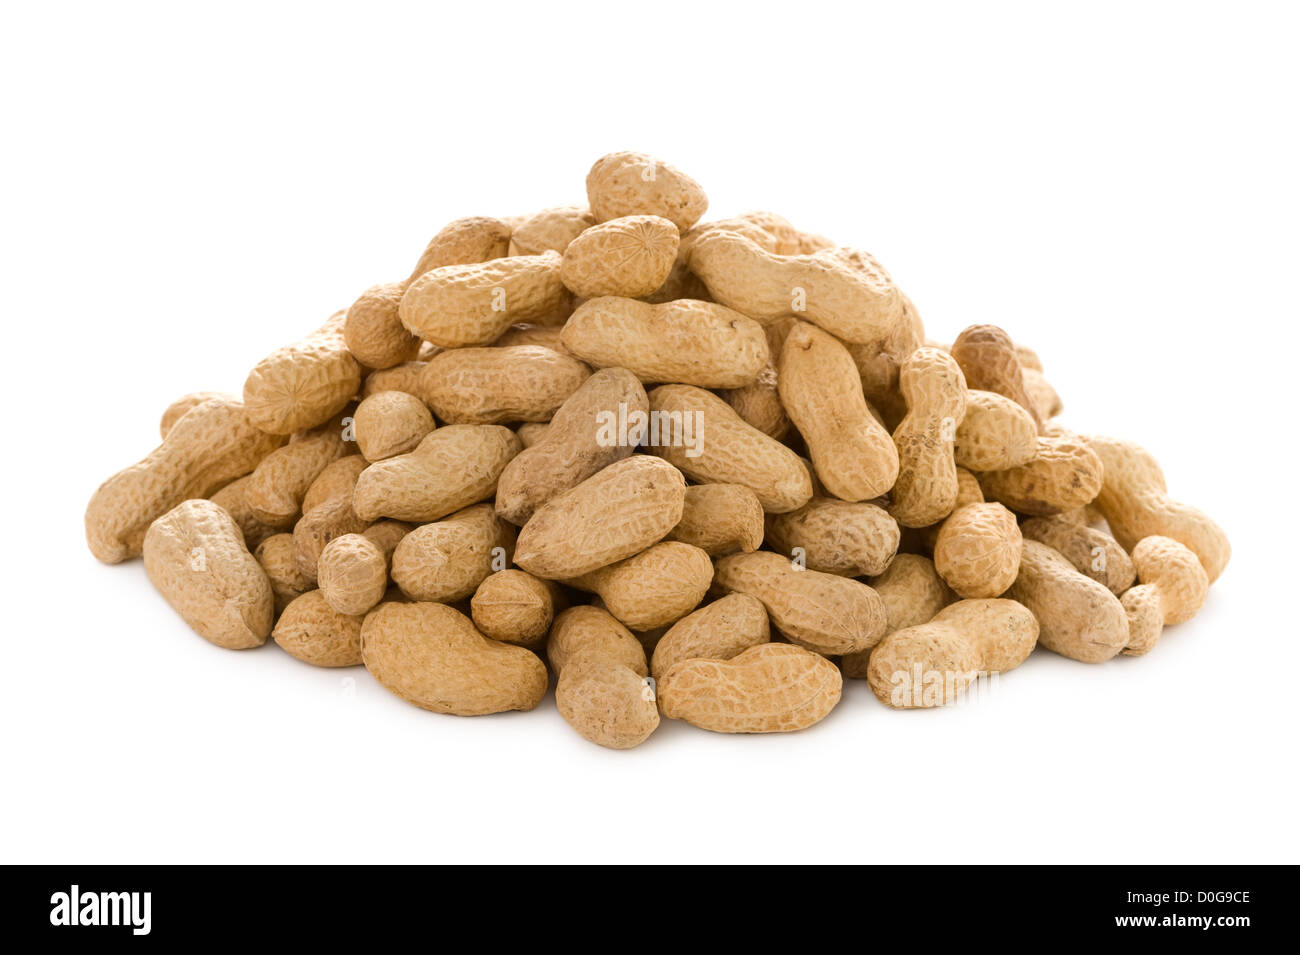 a heap of peanuts or monkey nuts isolated on a white background Stock Photo